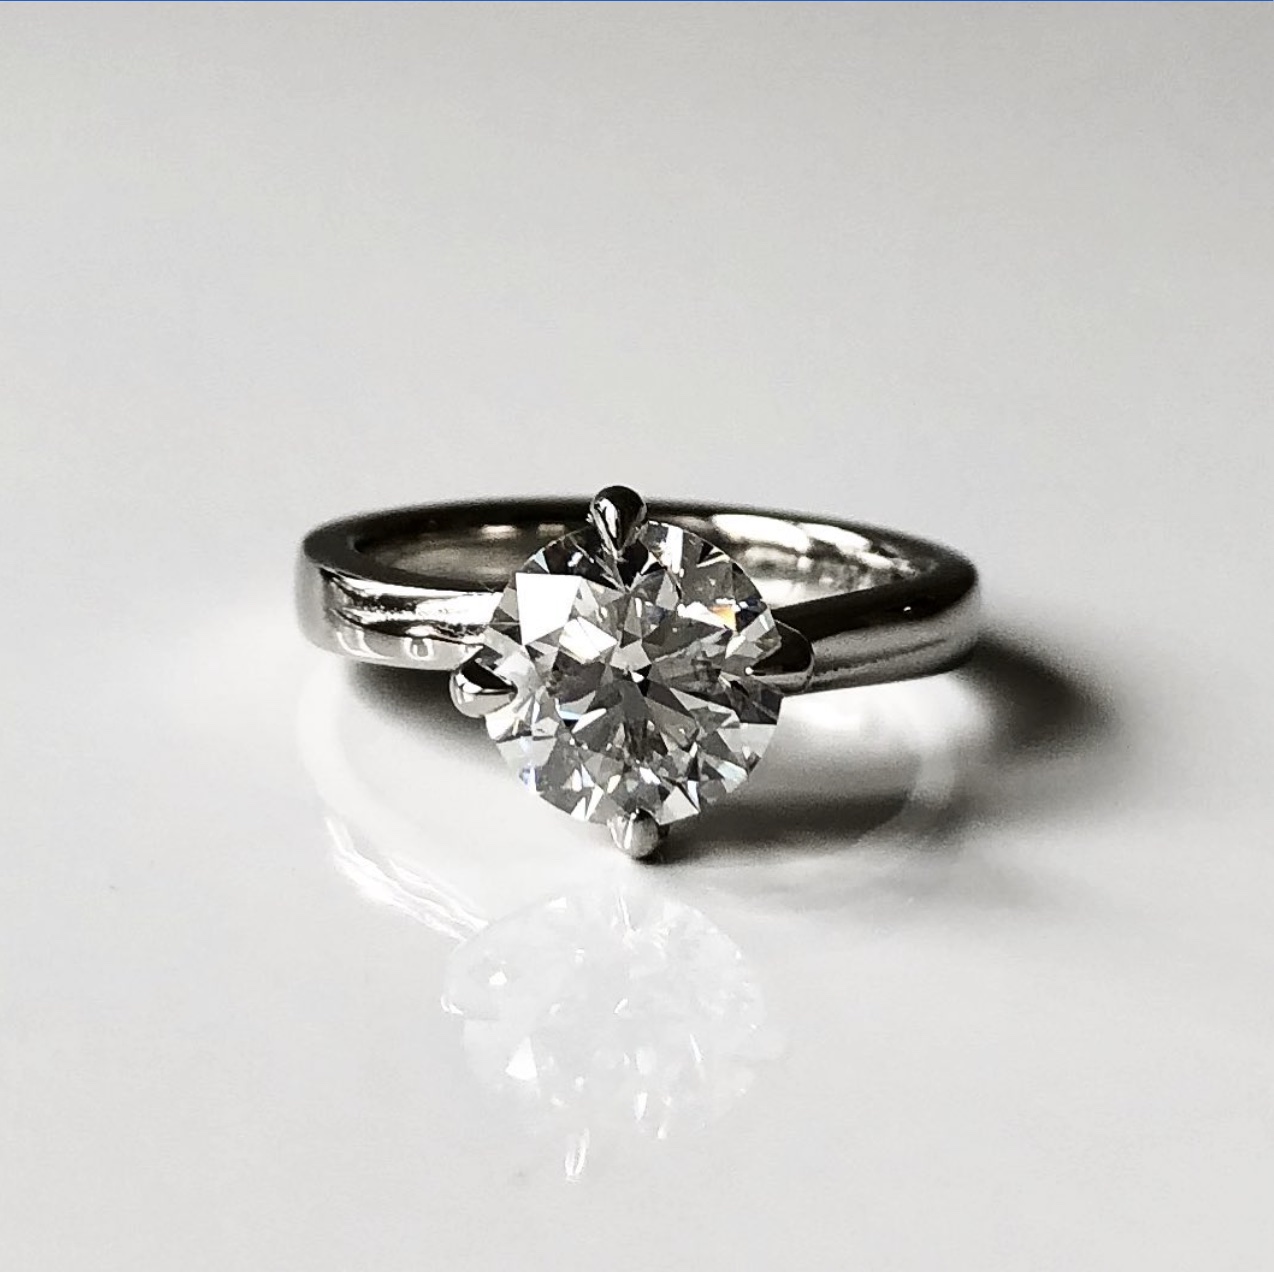 Solitaire Engagement Rings - Diamond Rings at Michael Hill New Zealand